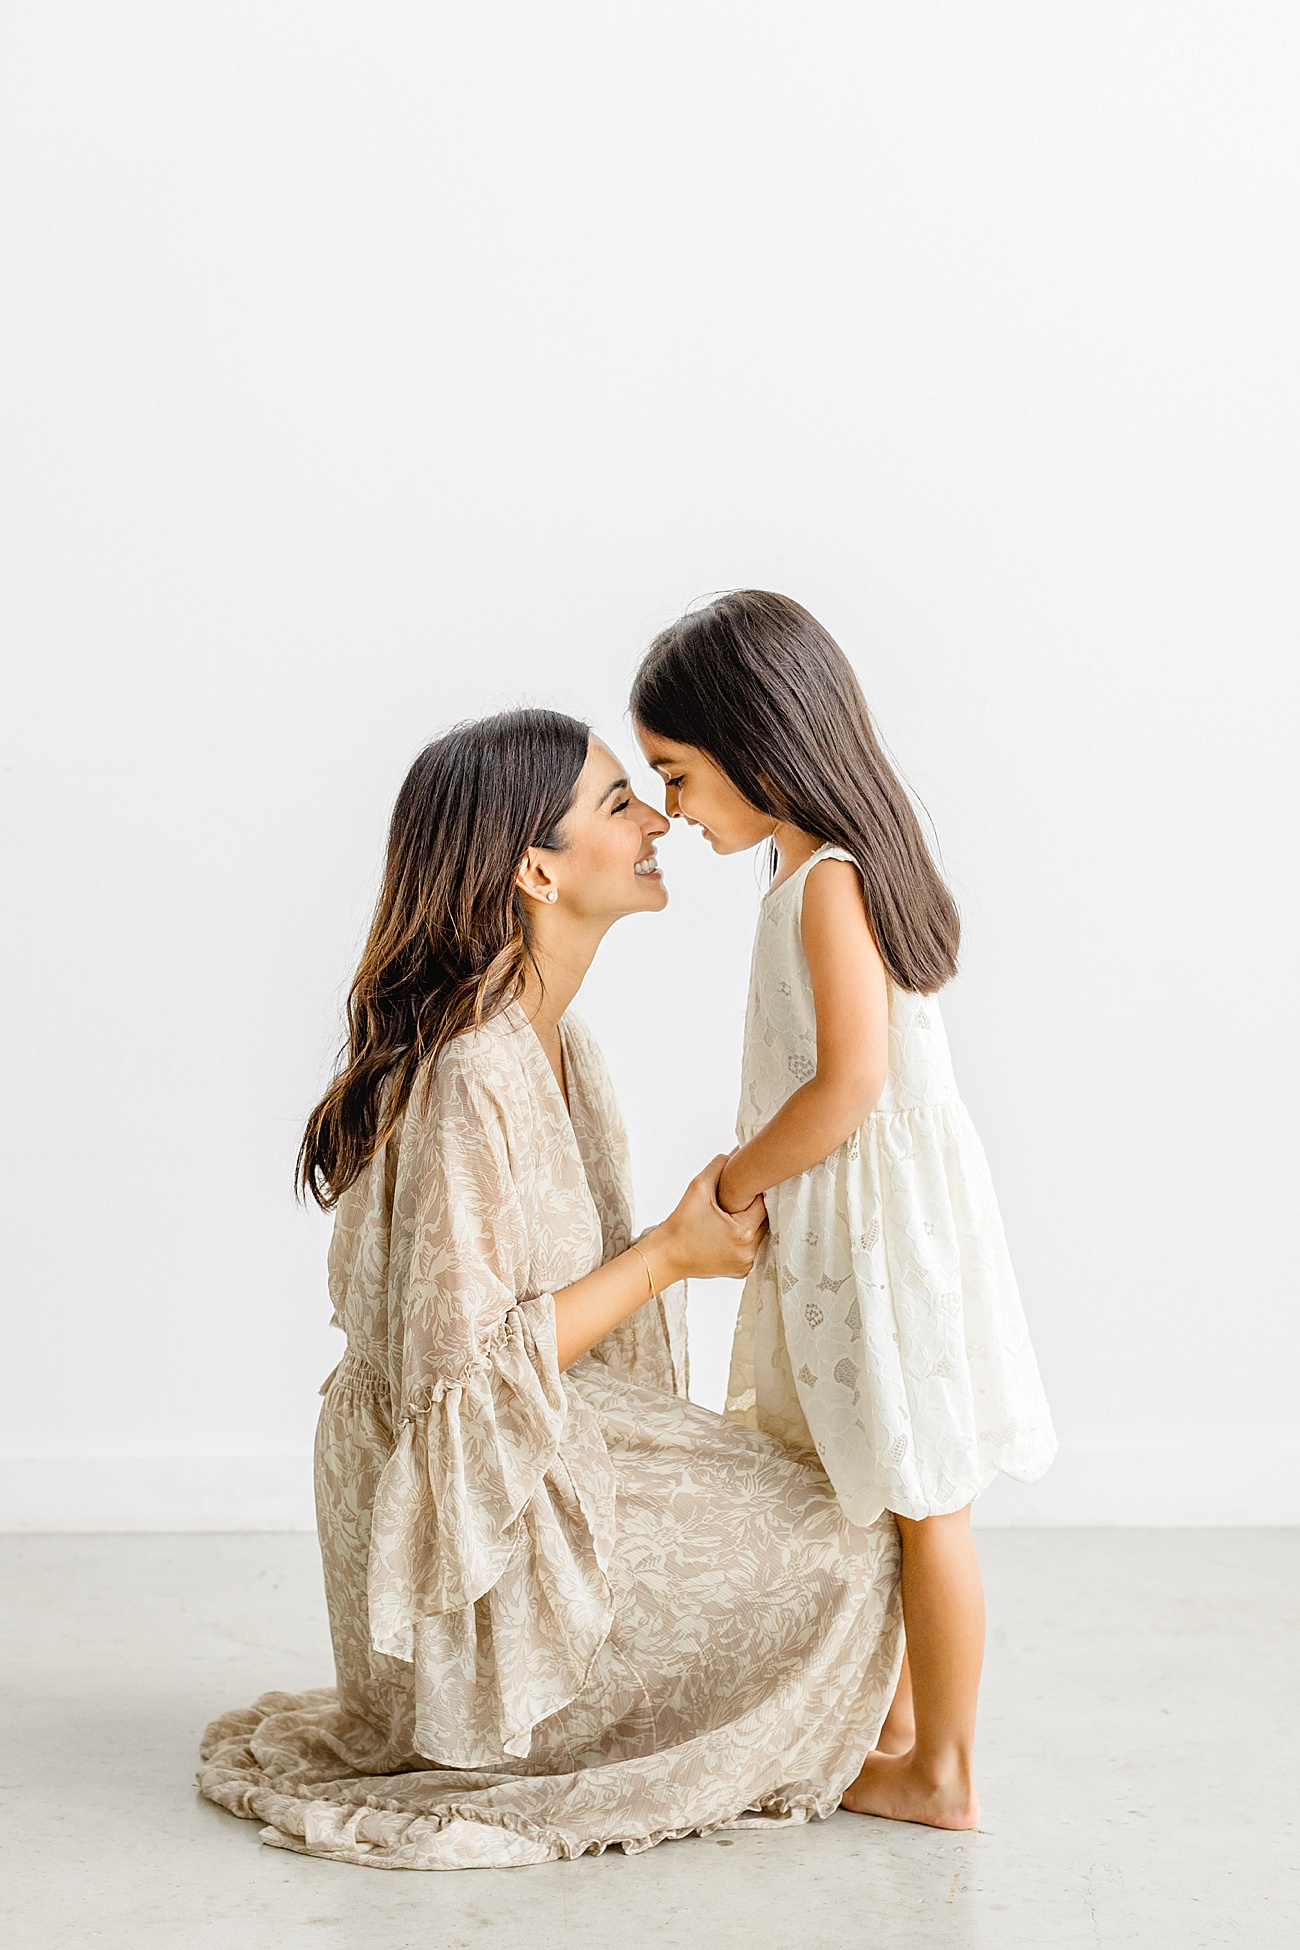 Sweet moment between Mom and daughter during family session in Austin studio by Sana Ahmed Photography.